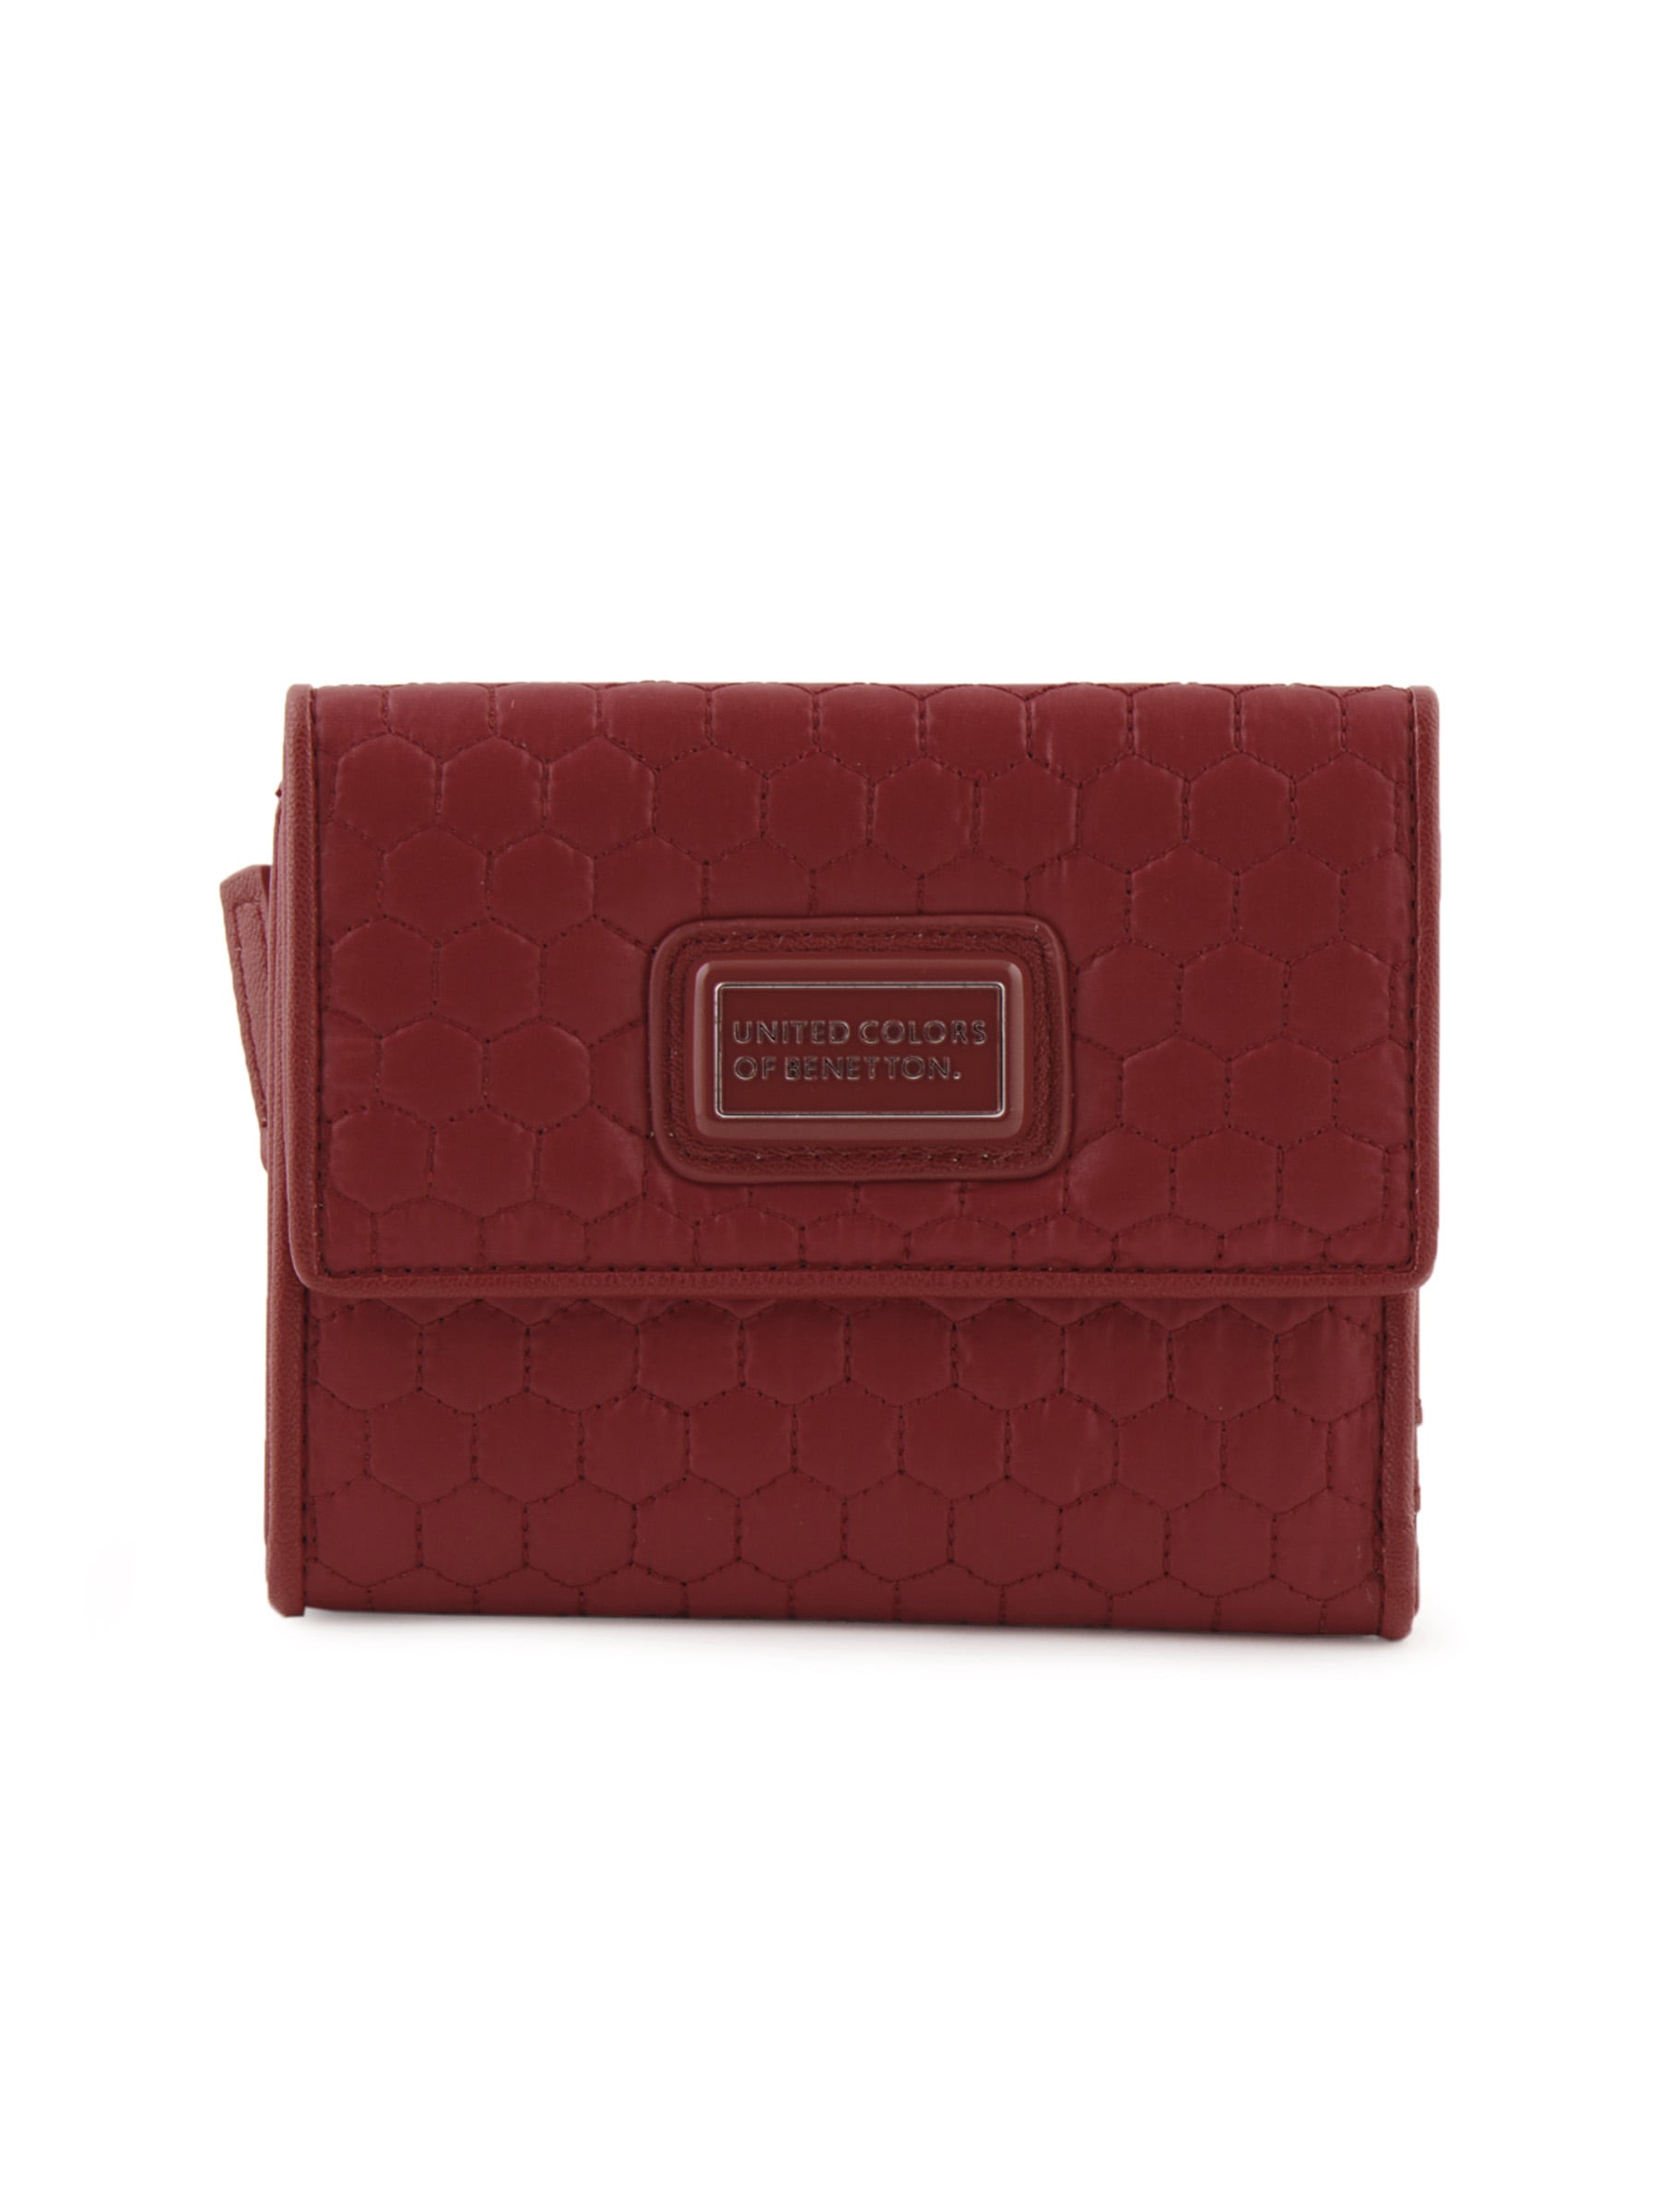 United Colors of Benetton Women Solid Red Wallets